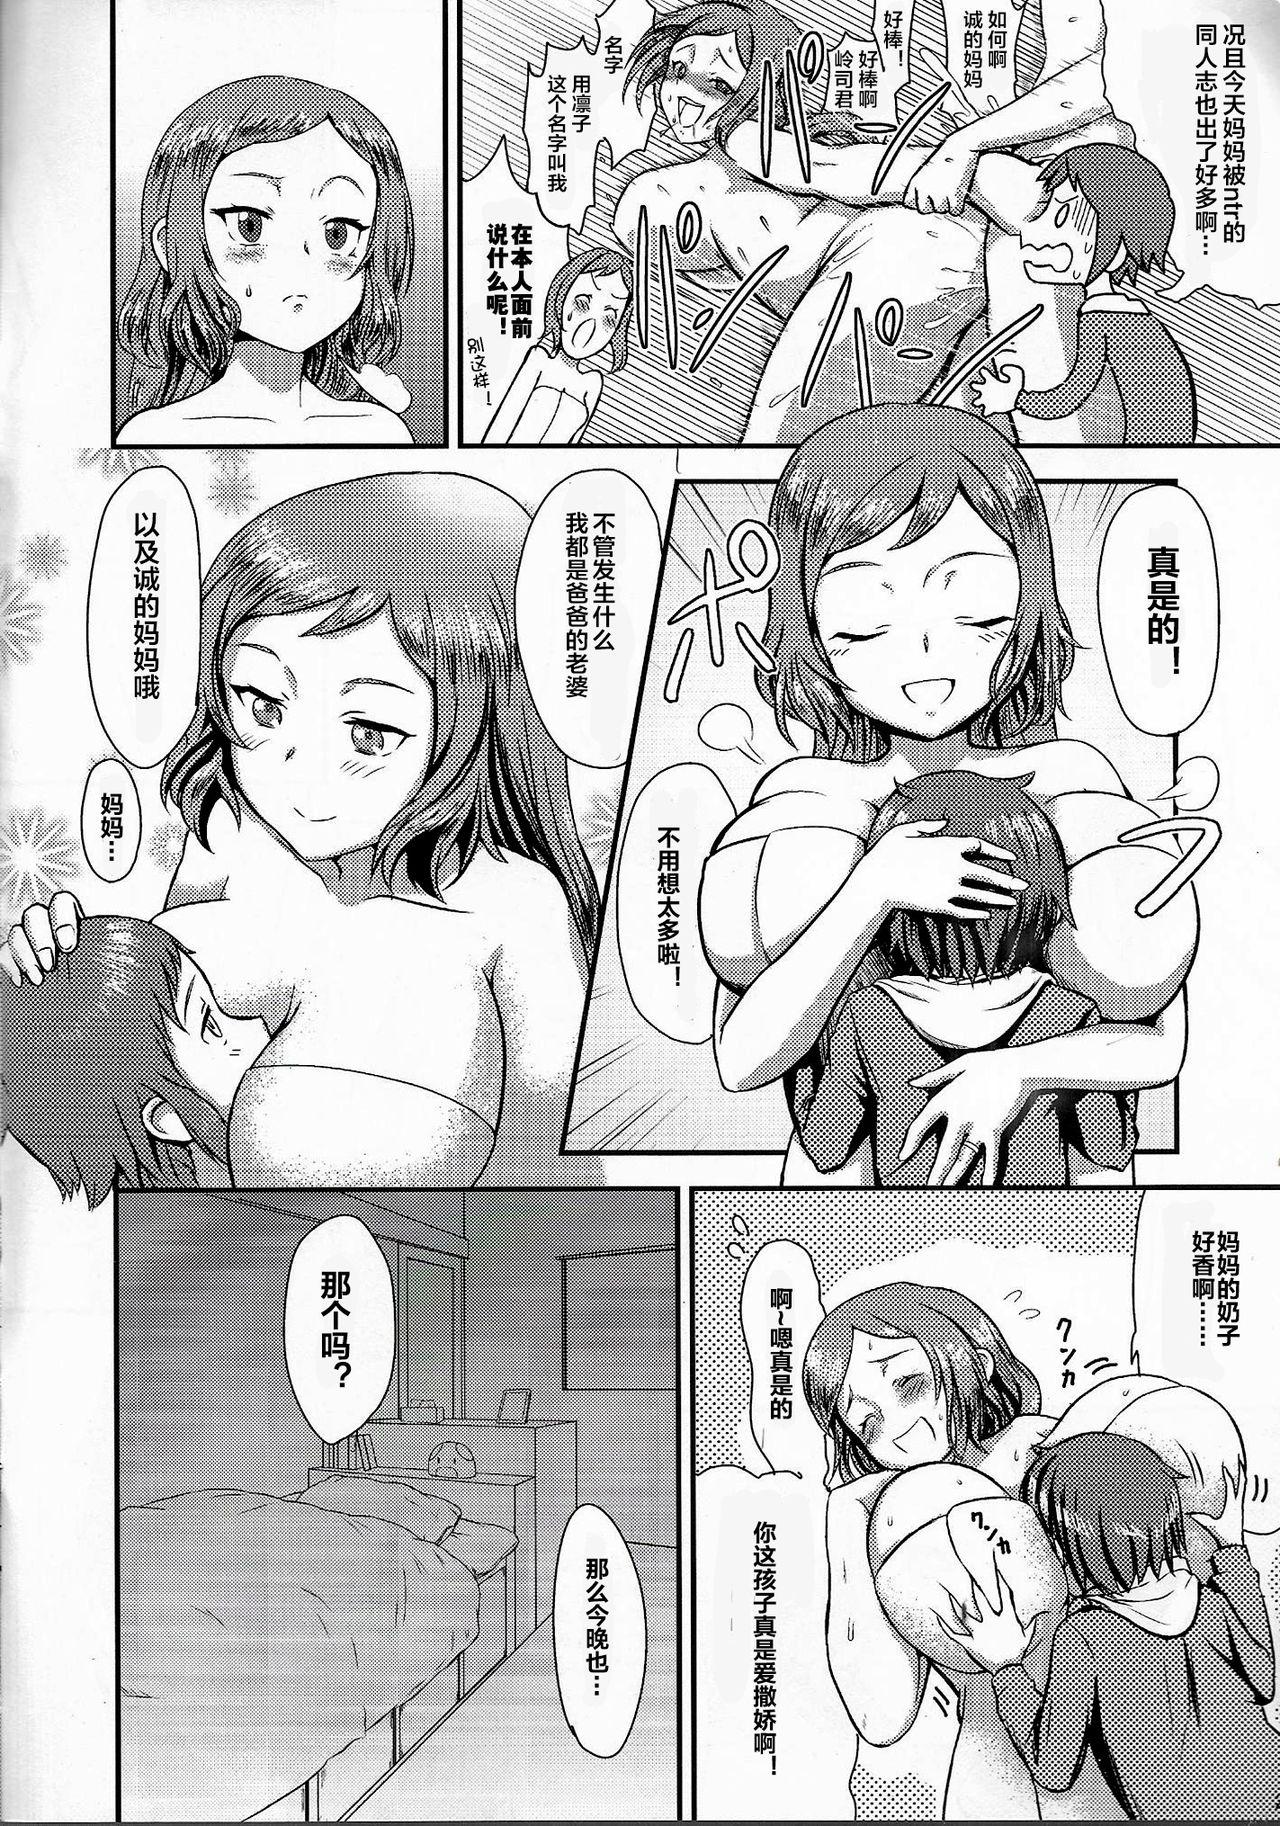 Foot Fetish Rinko Mama to Nyan x2 shitaai!! - Gundam build fighters Doggy Style Porn - Page 3